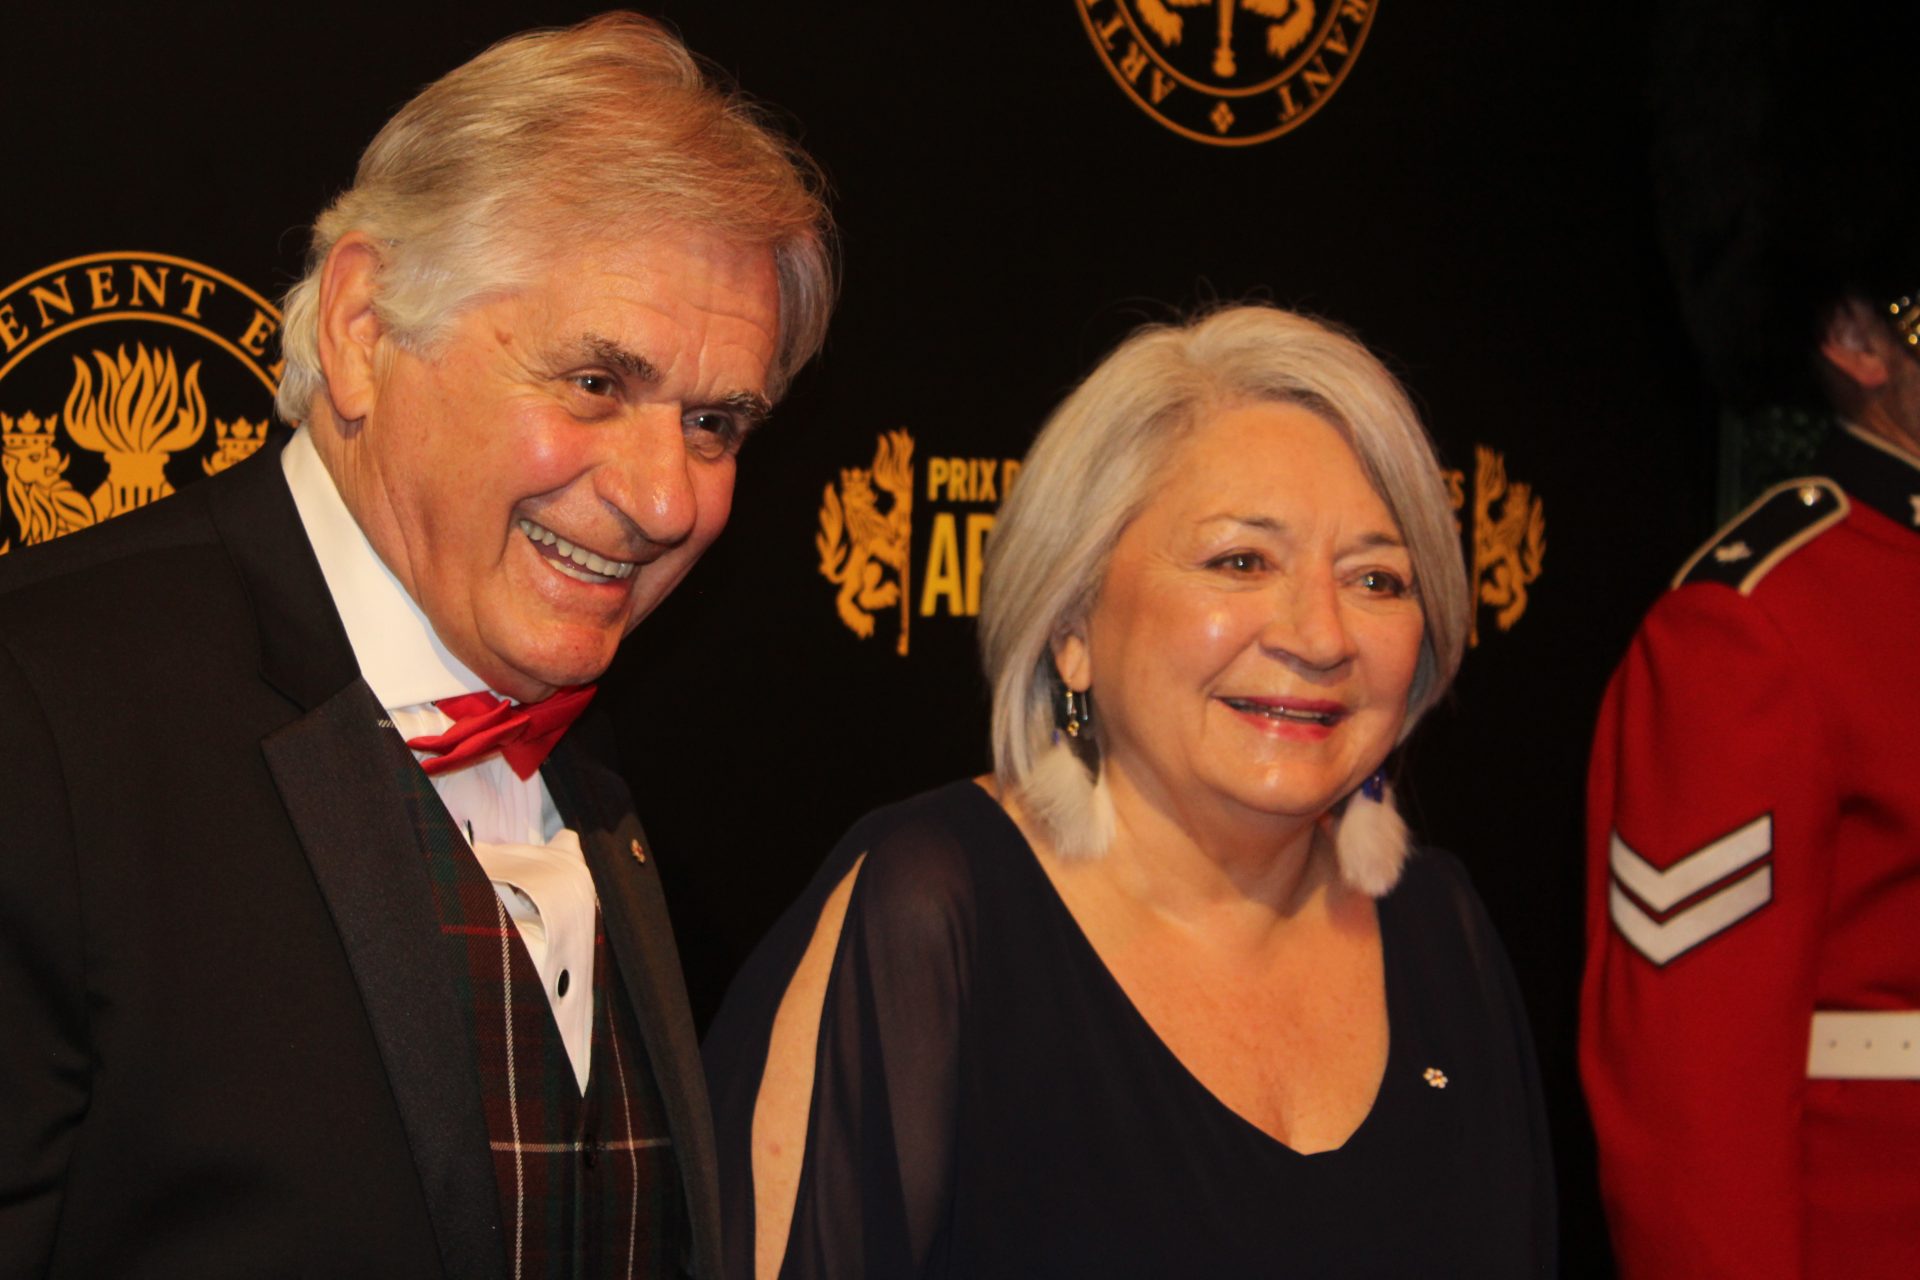 Her Excellency the Right Honourable Governor General Mary Simon, right, and her husband, His Excellency Whit Fraser at the 2023 Governor General's Performing Arts Awards on May 27, at the National Arts Centre.